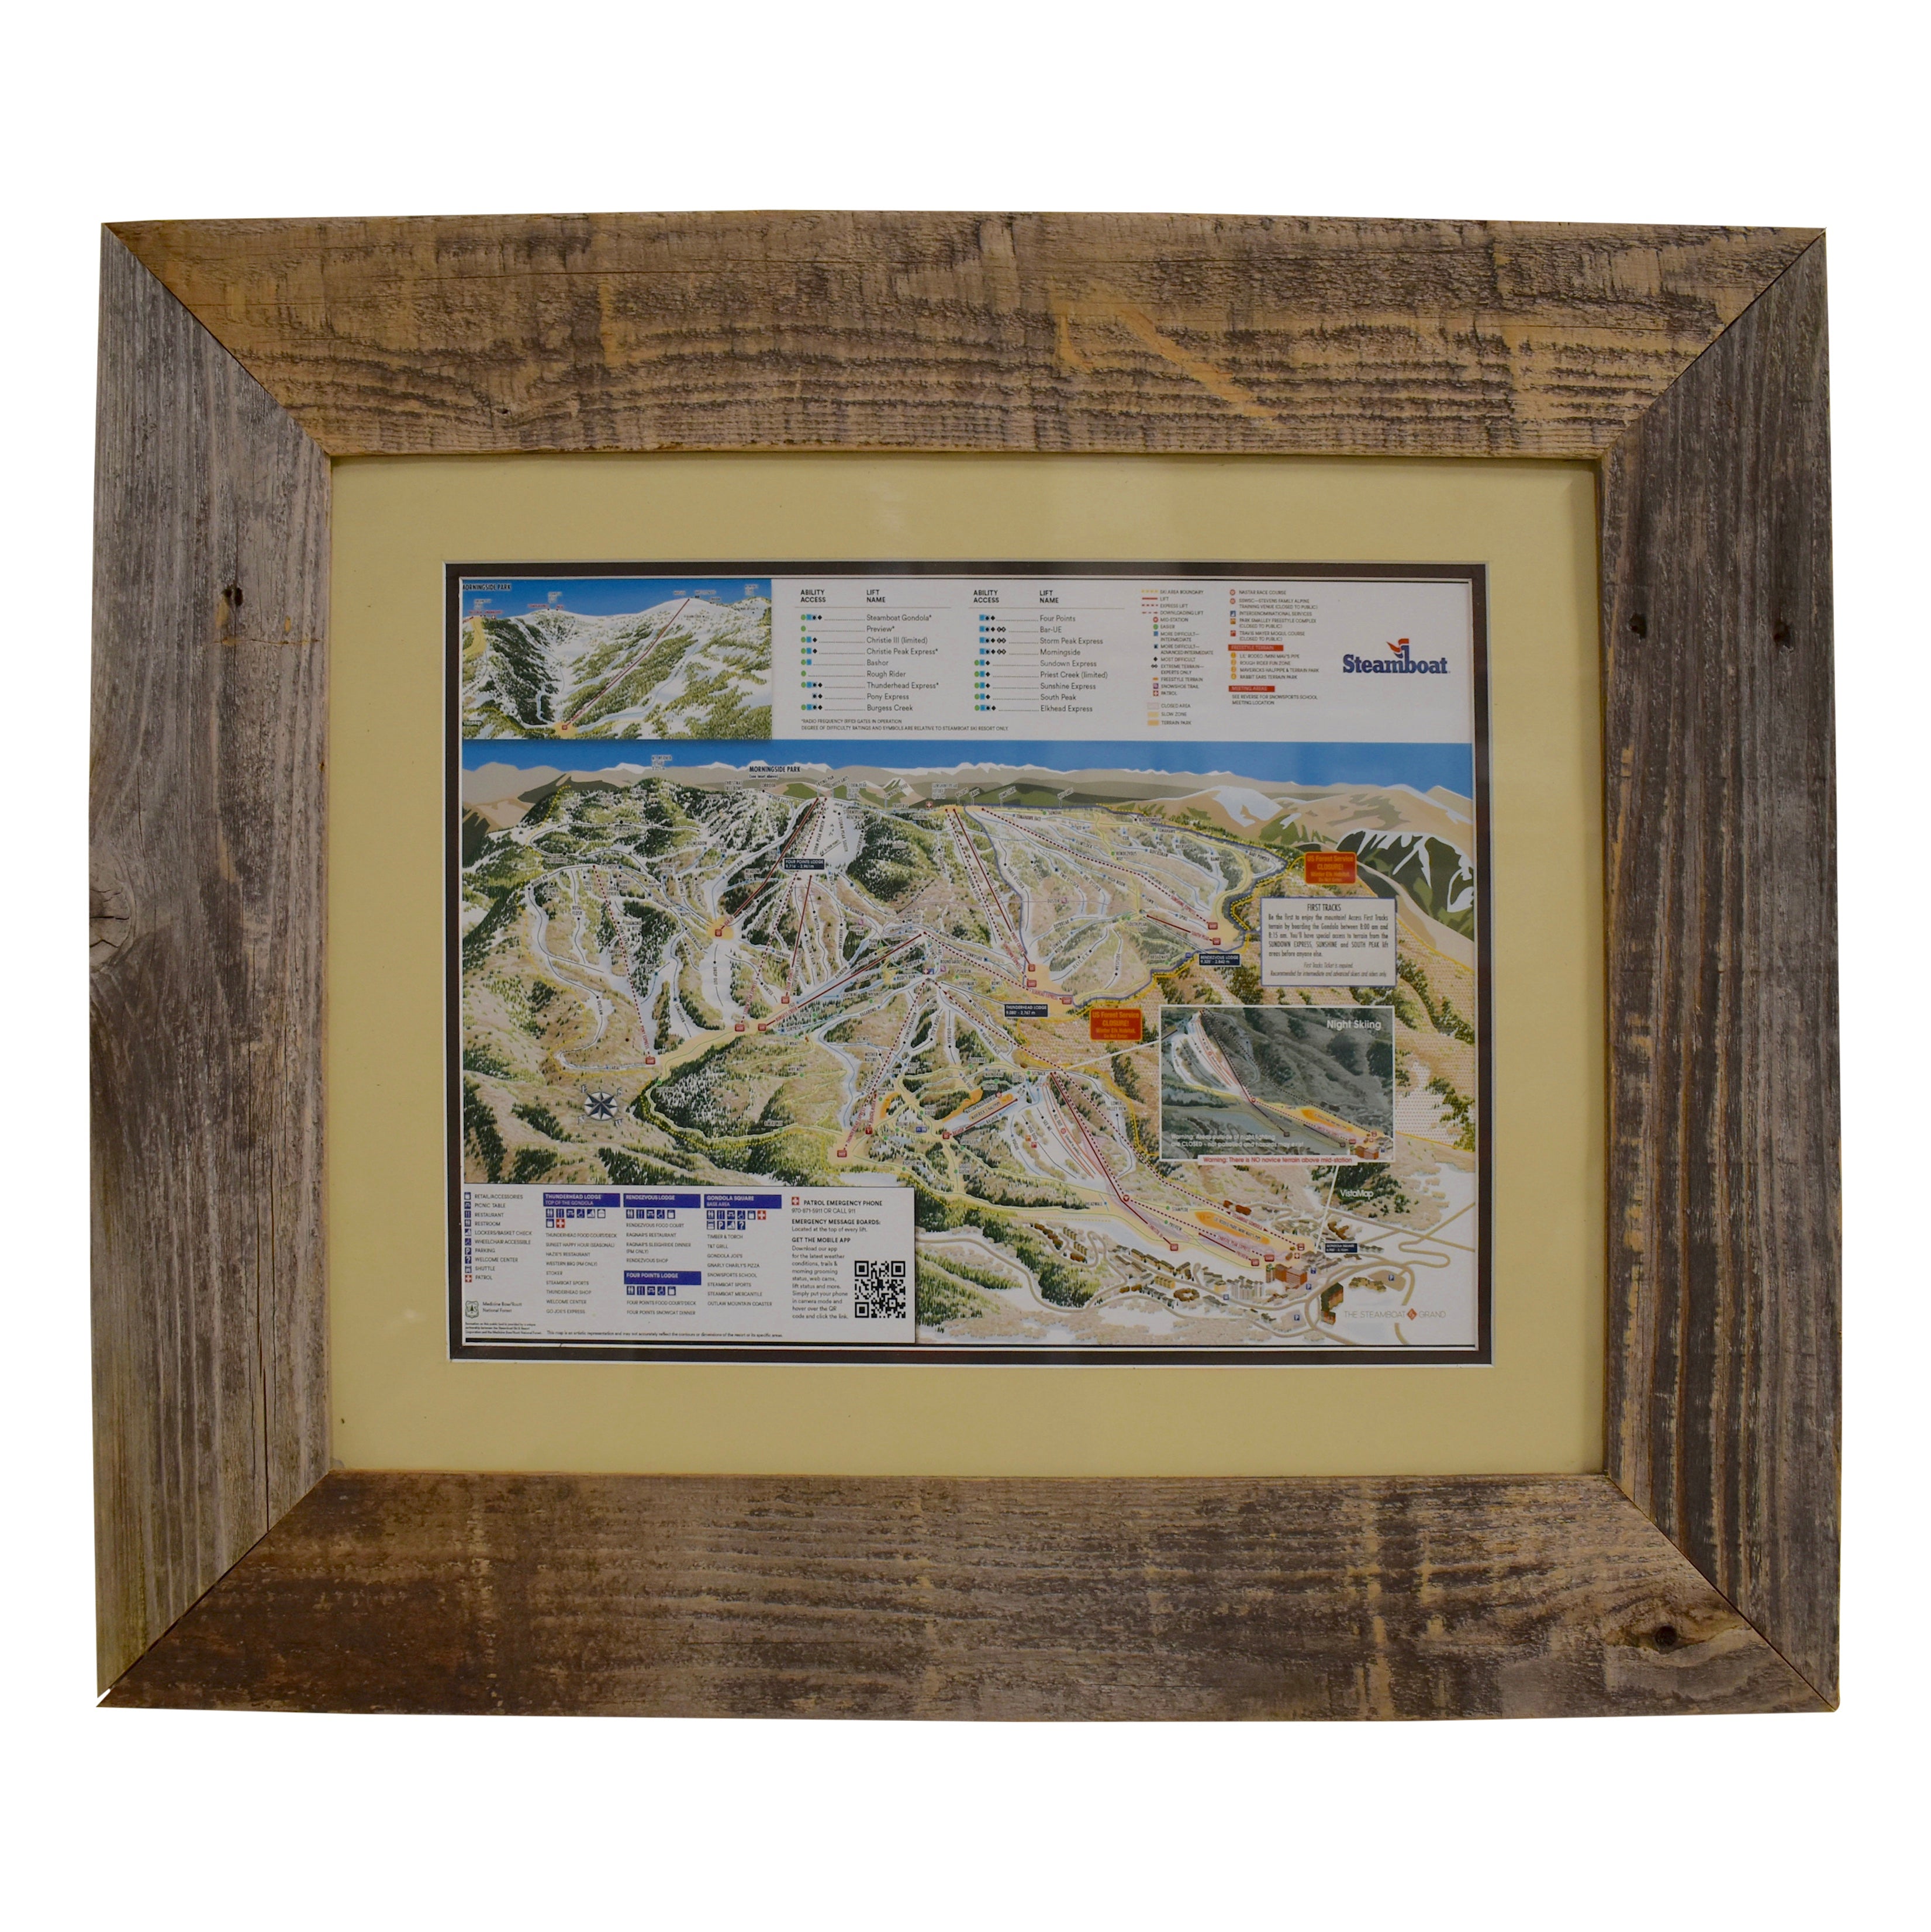 Steamboat Trail Map Framed in Glass